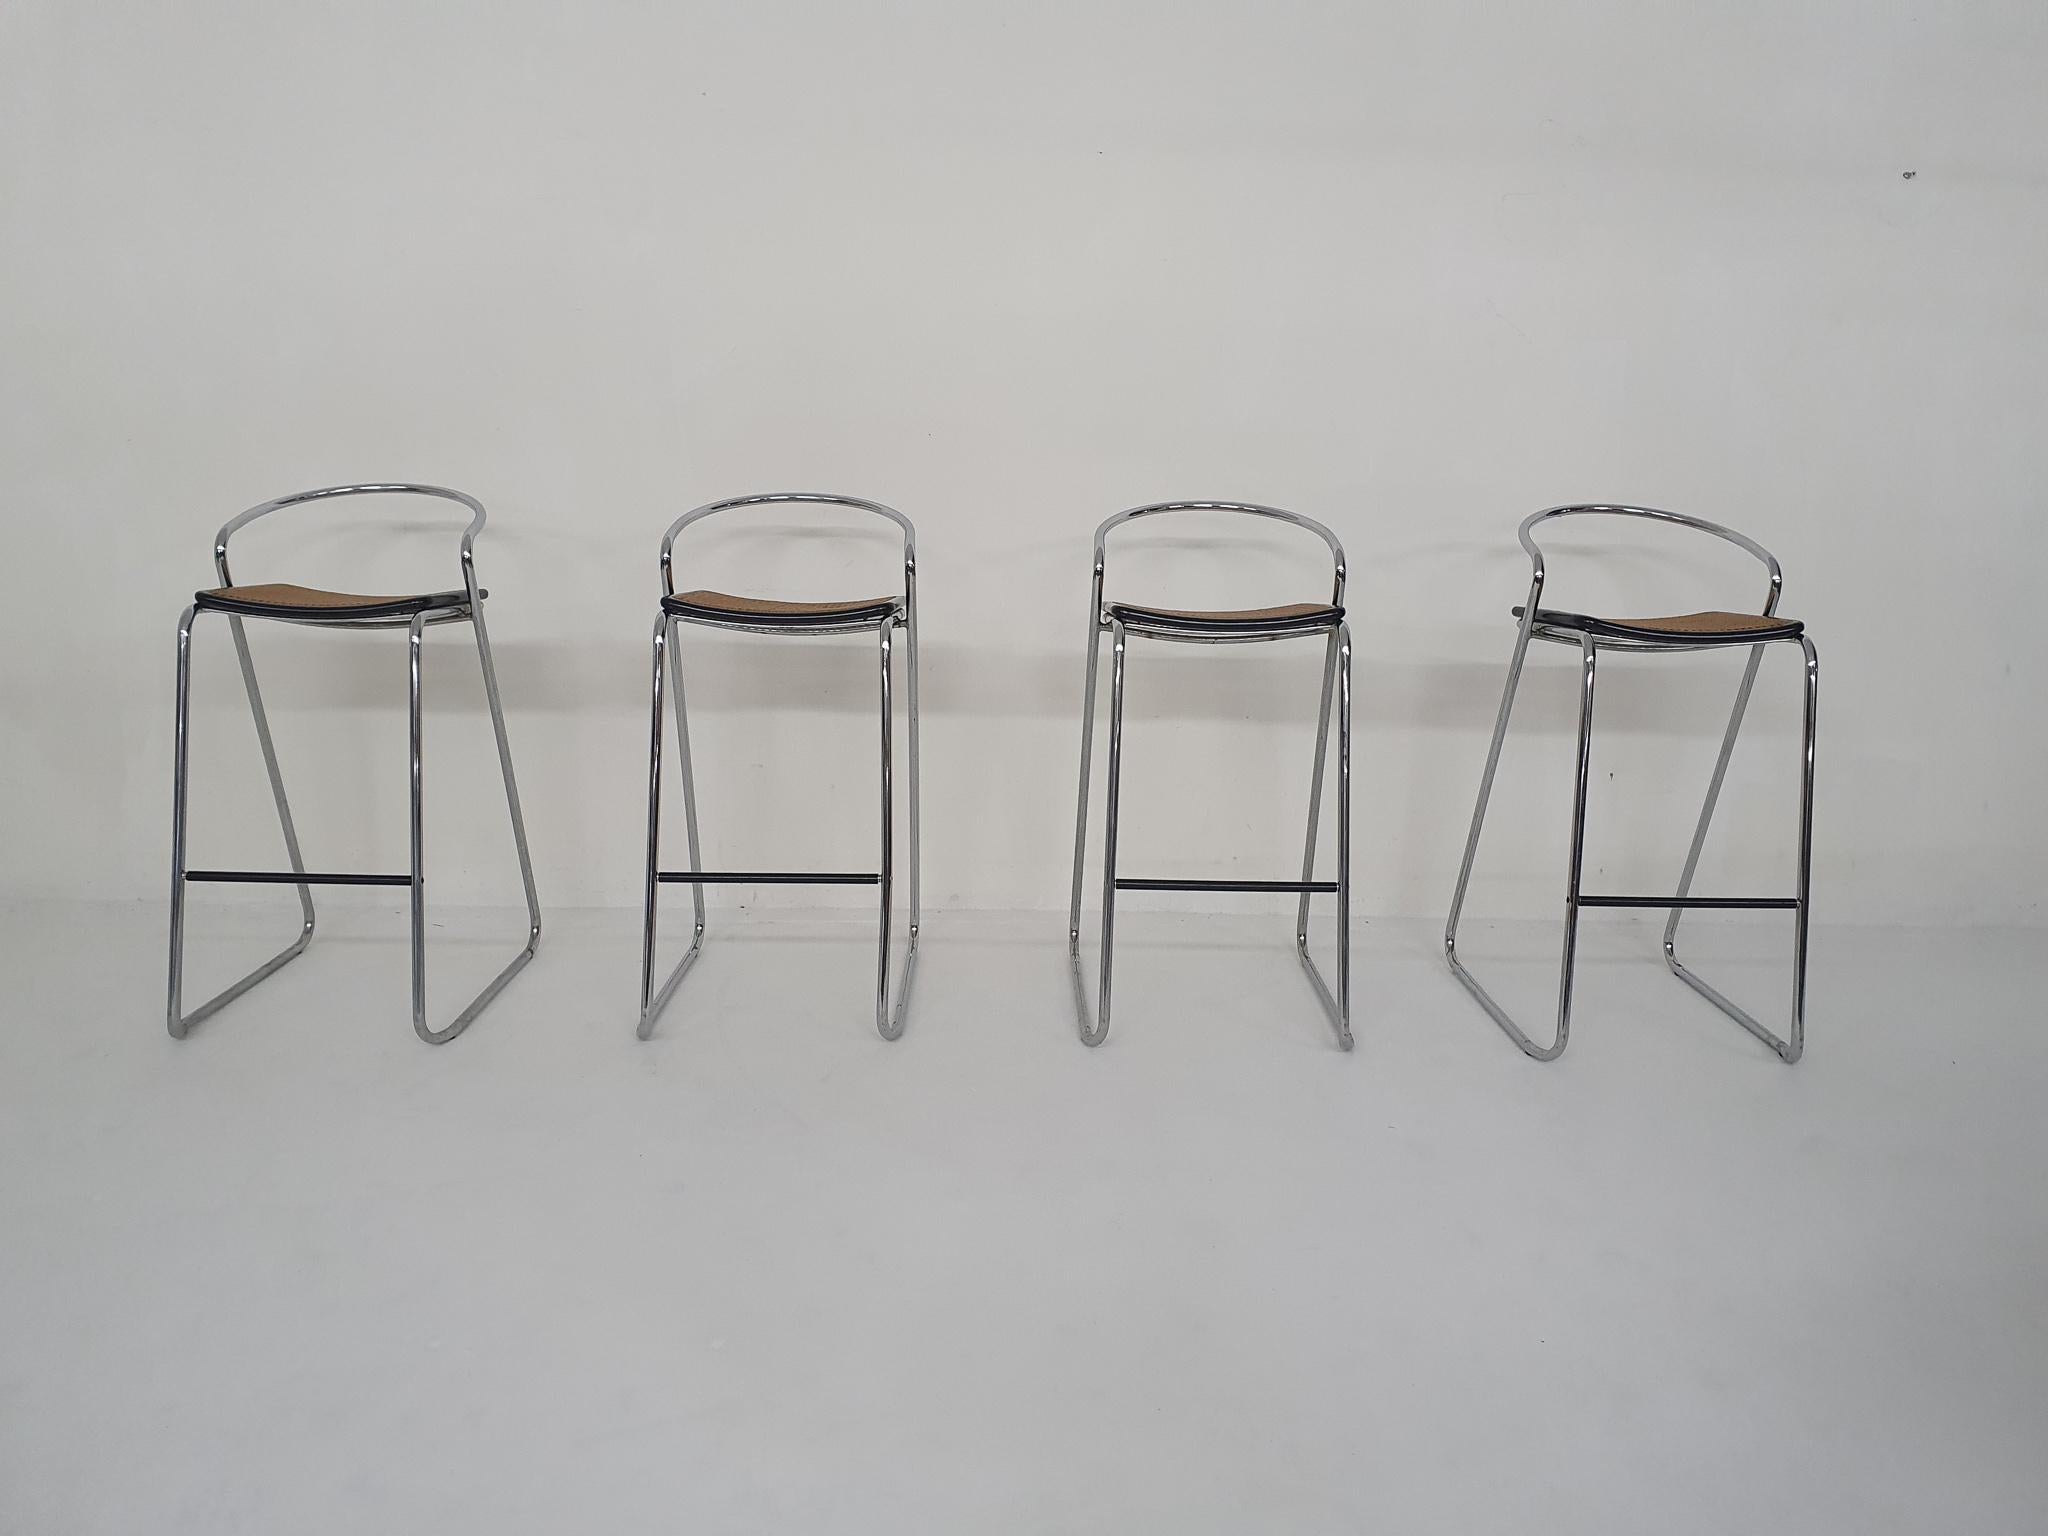 Set of four tubular chrome bar stools with webbing seats, inspired by the cesca chairs of Marcel Breuer.
In good condition, some rust spots on the frames.